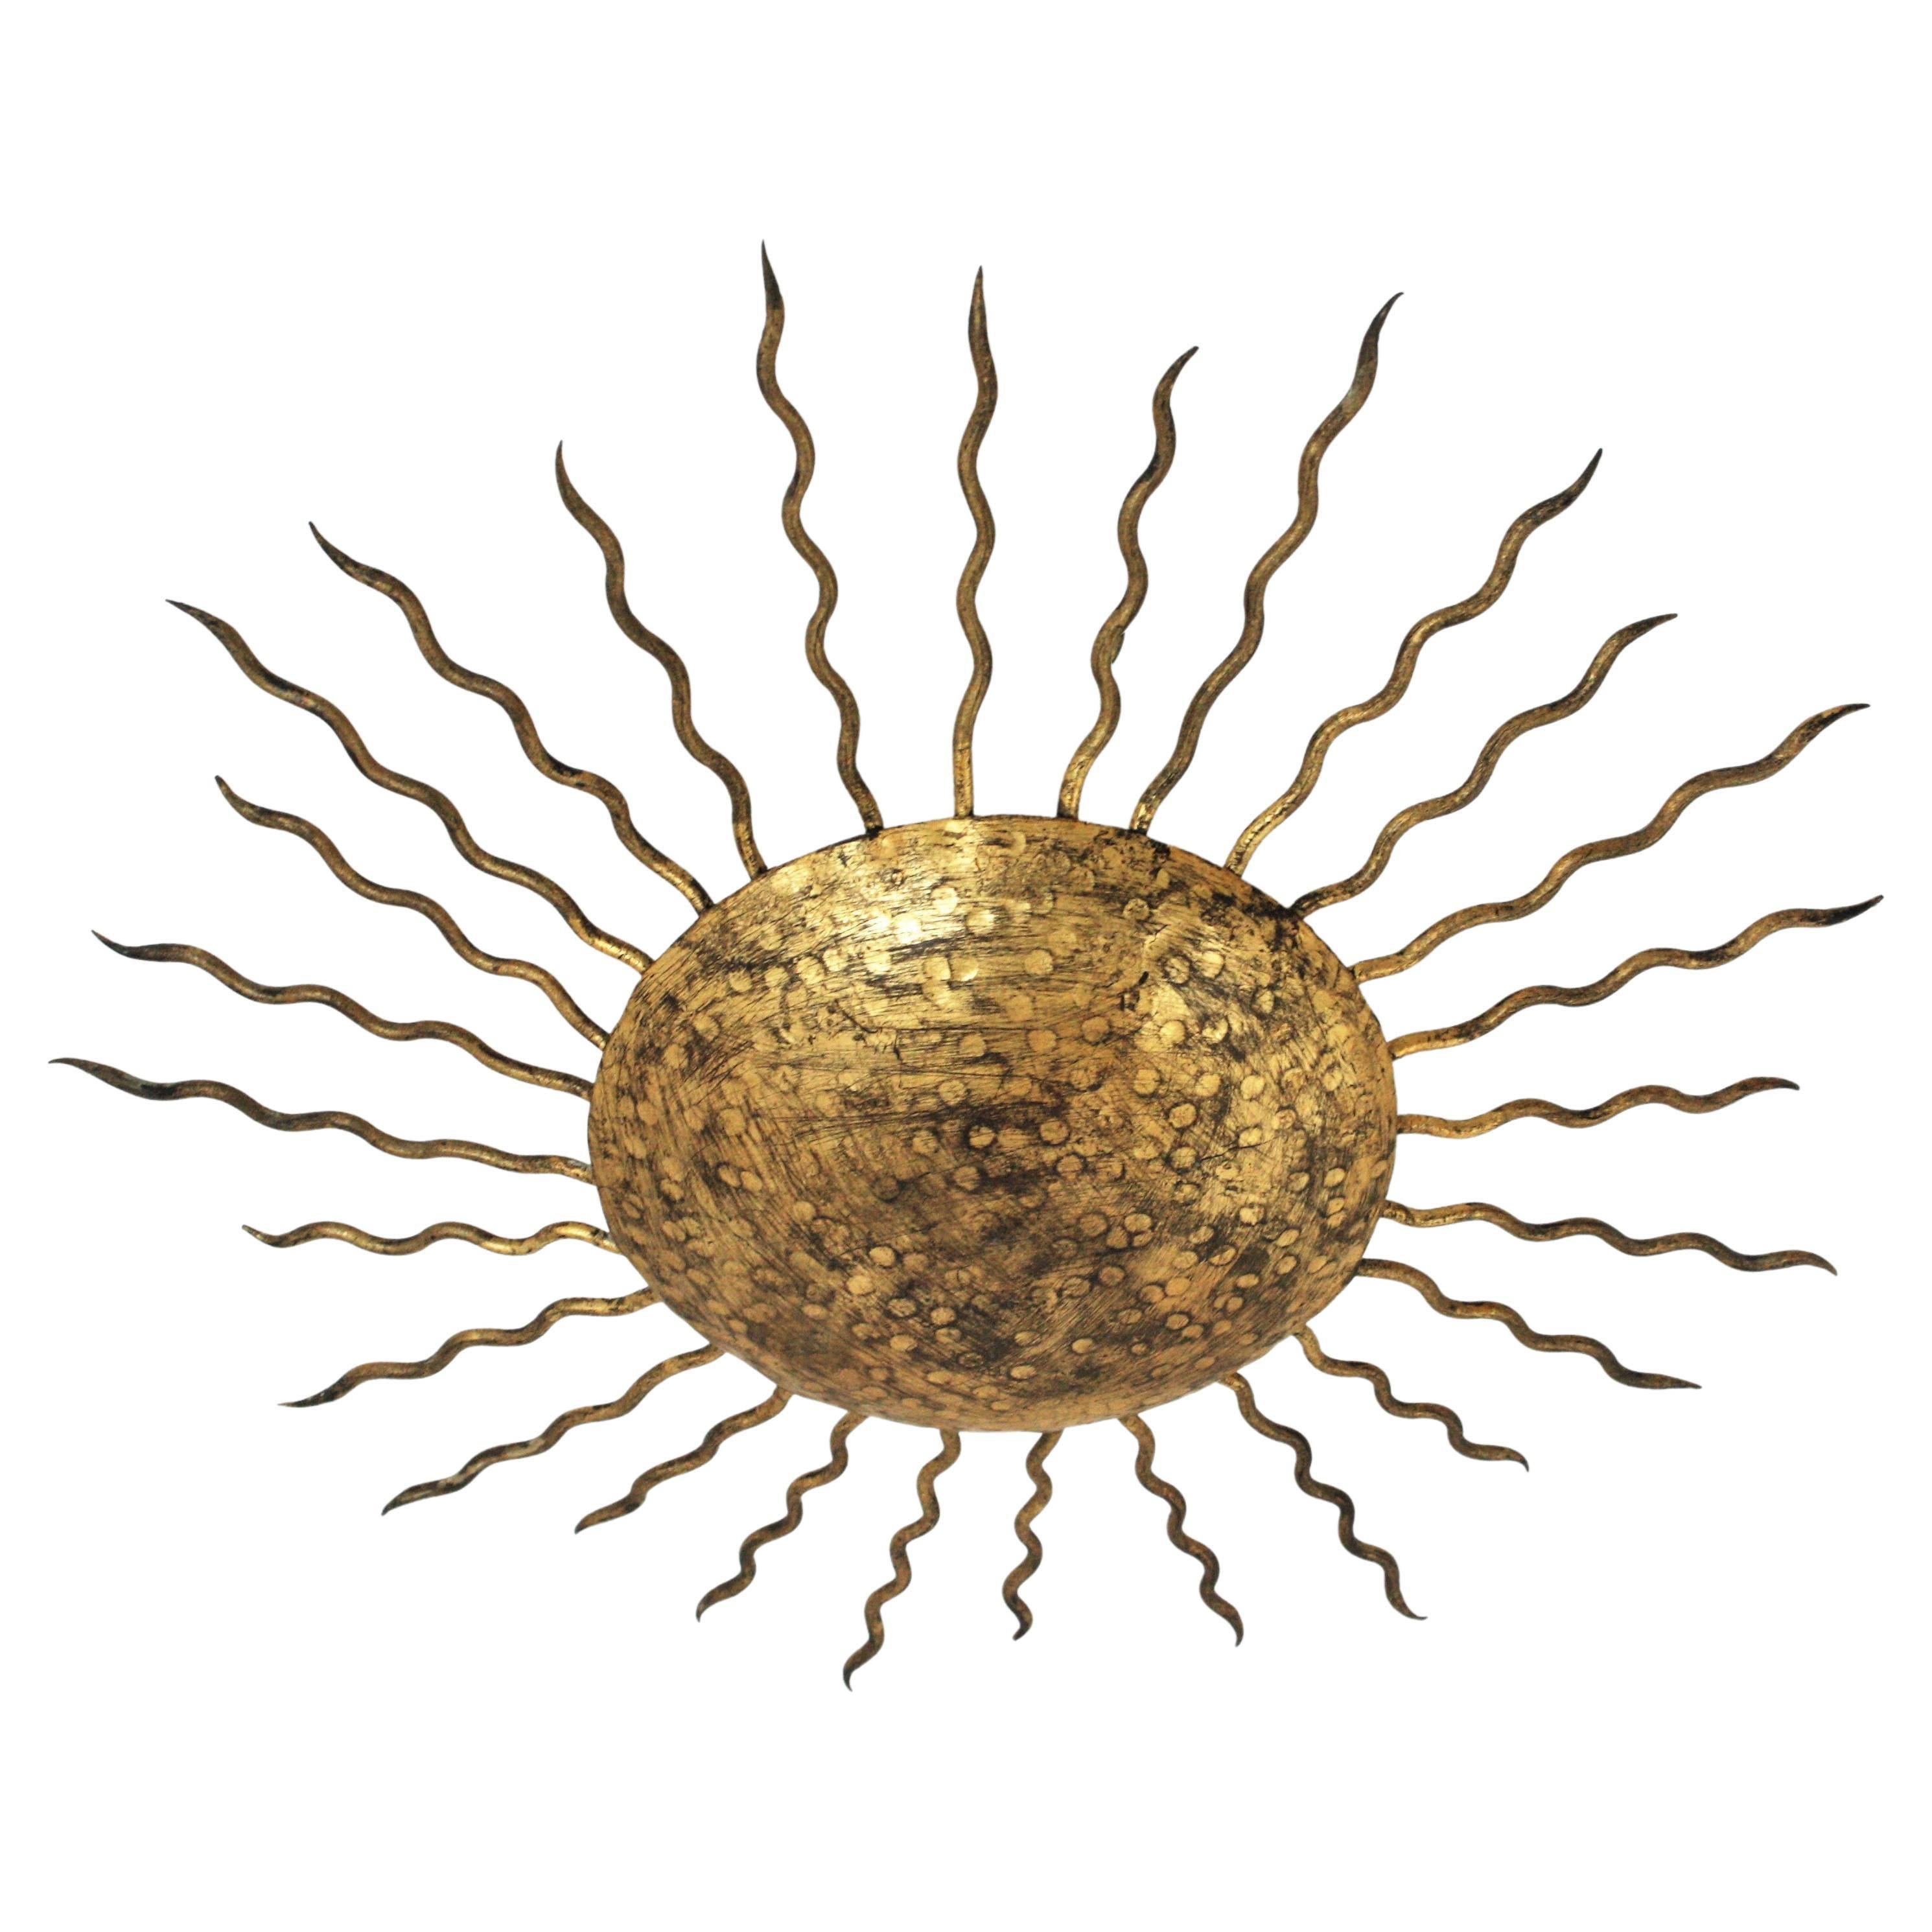 Gold leaf gilt wrought iron sunburst flush mount, Spain, 1950s.
Large Hand-hammered sunburst light fixture richly decorated in the central part by the hammer marks. Curly iron rays surrounding the central sphere.
Original gold leaf gilding and